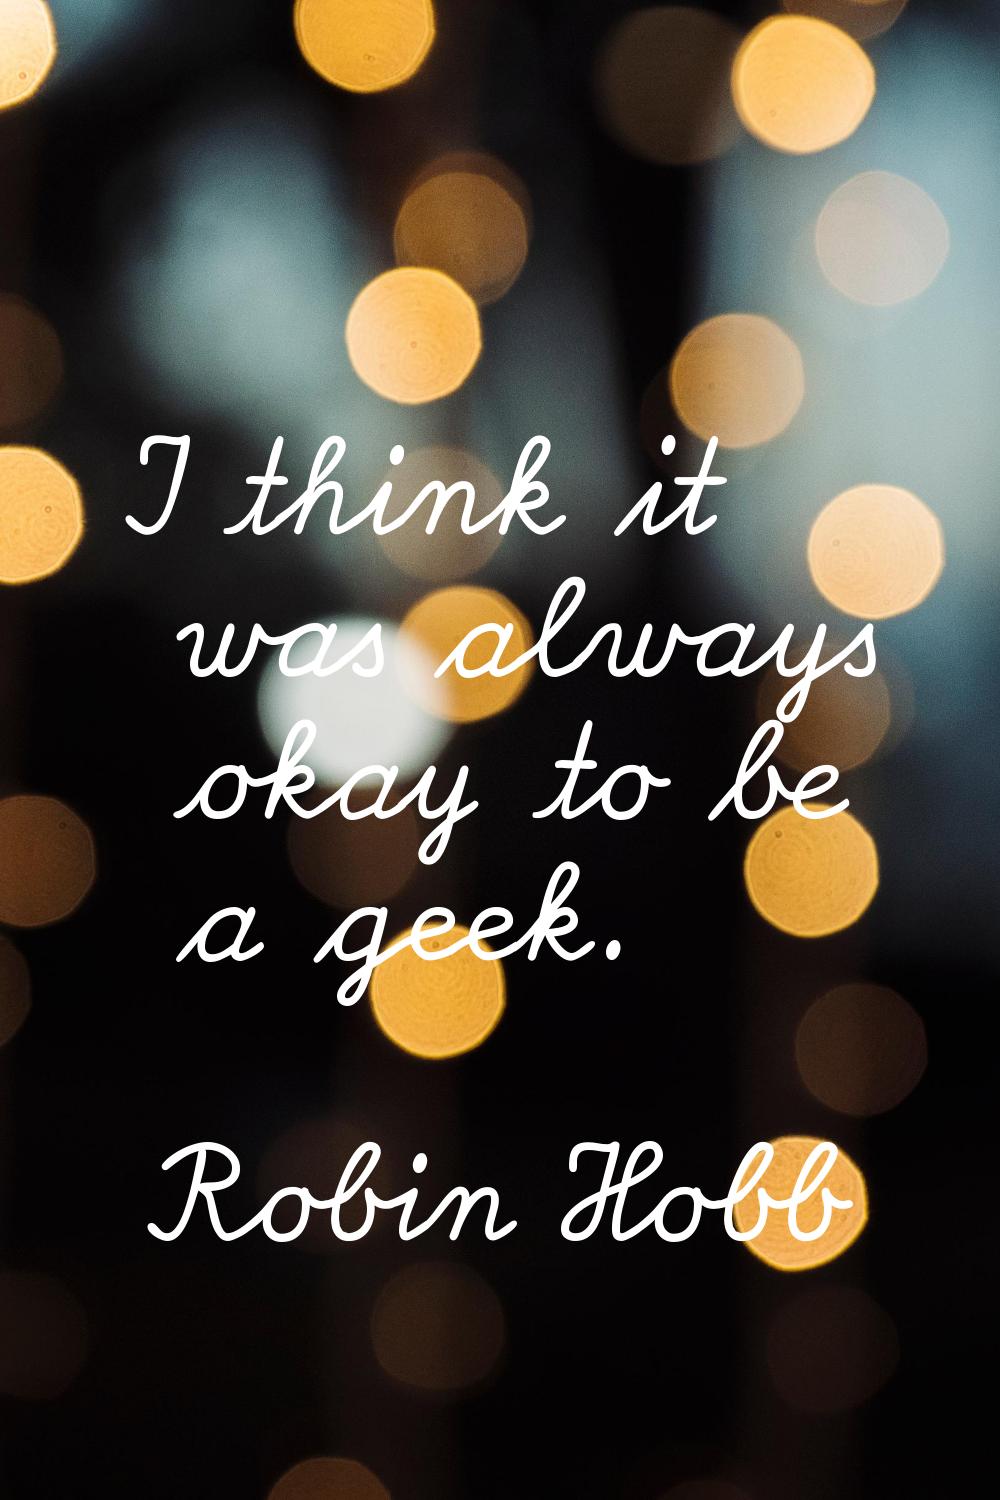 I think it was always okay to be a geek.